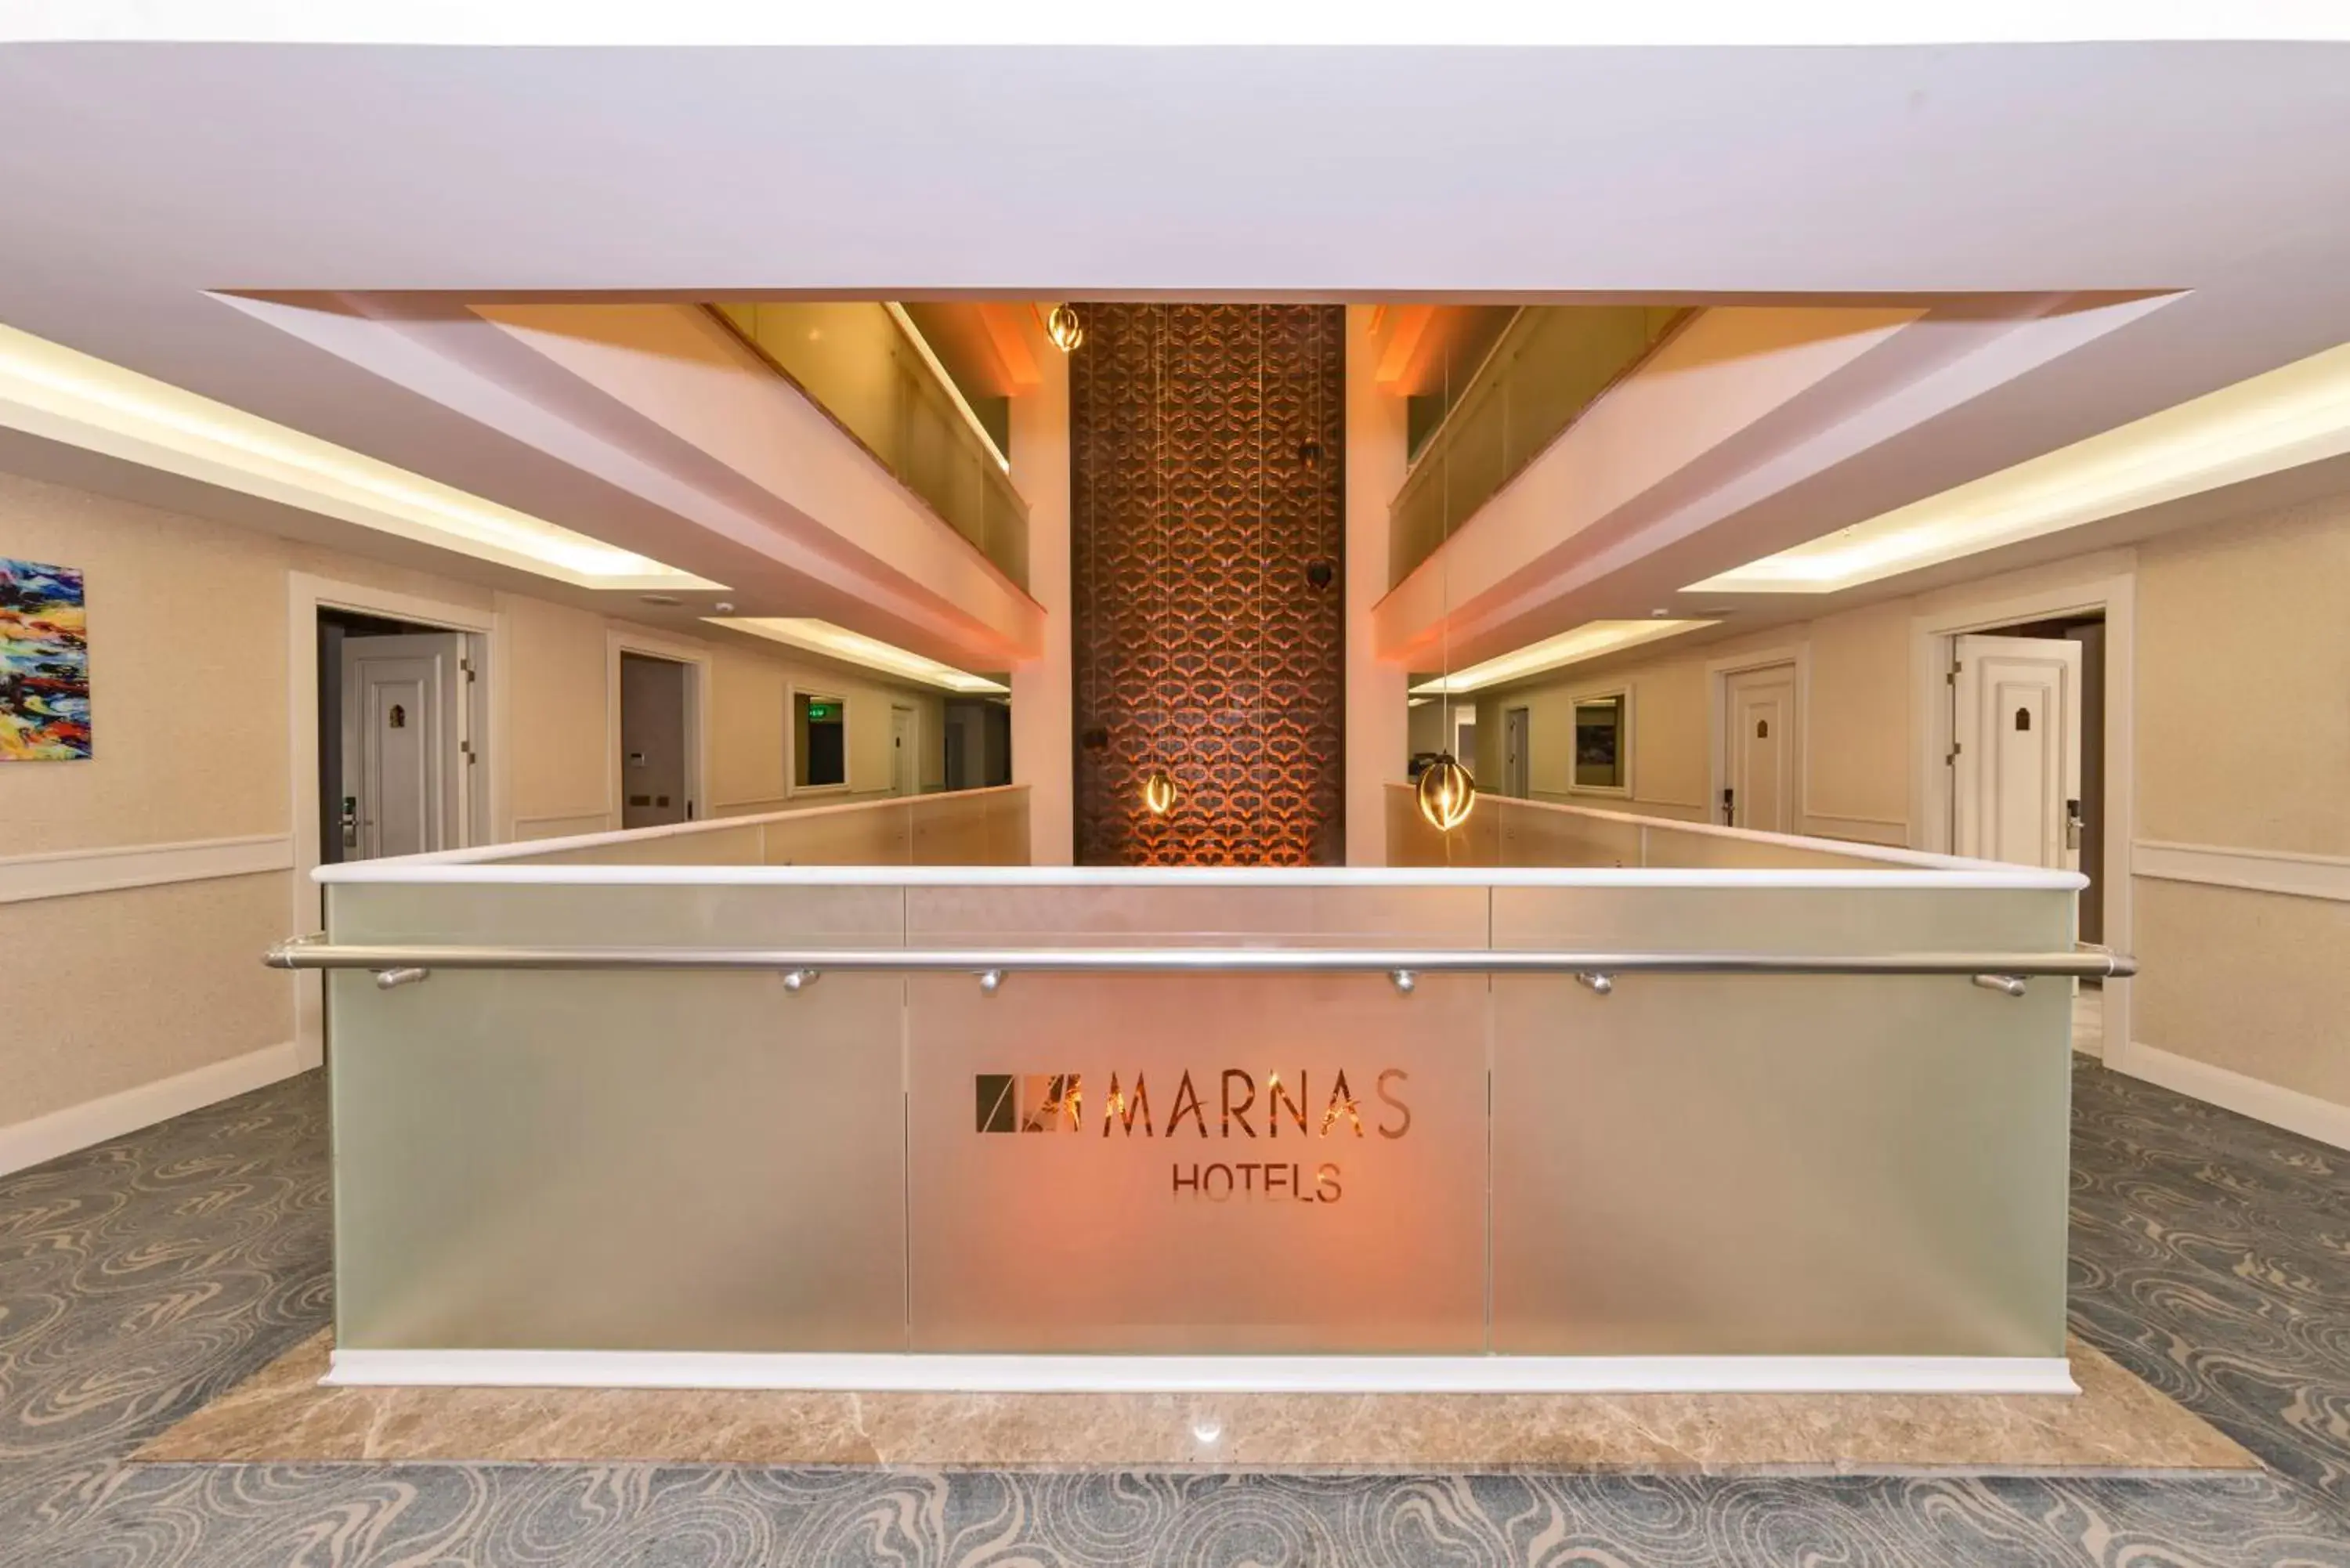 Property building in Marnas Hotels